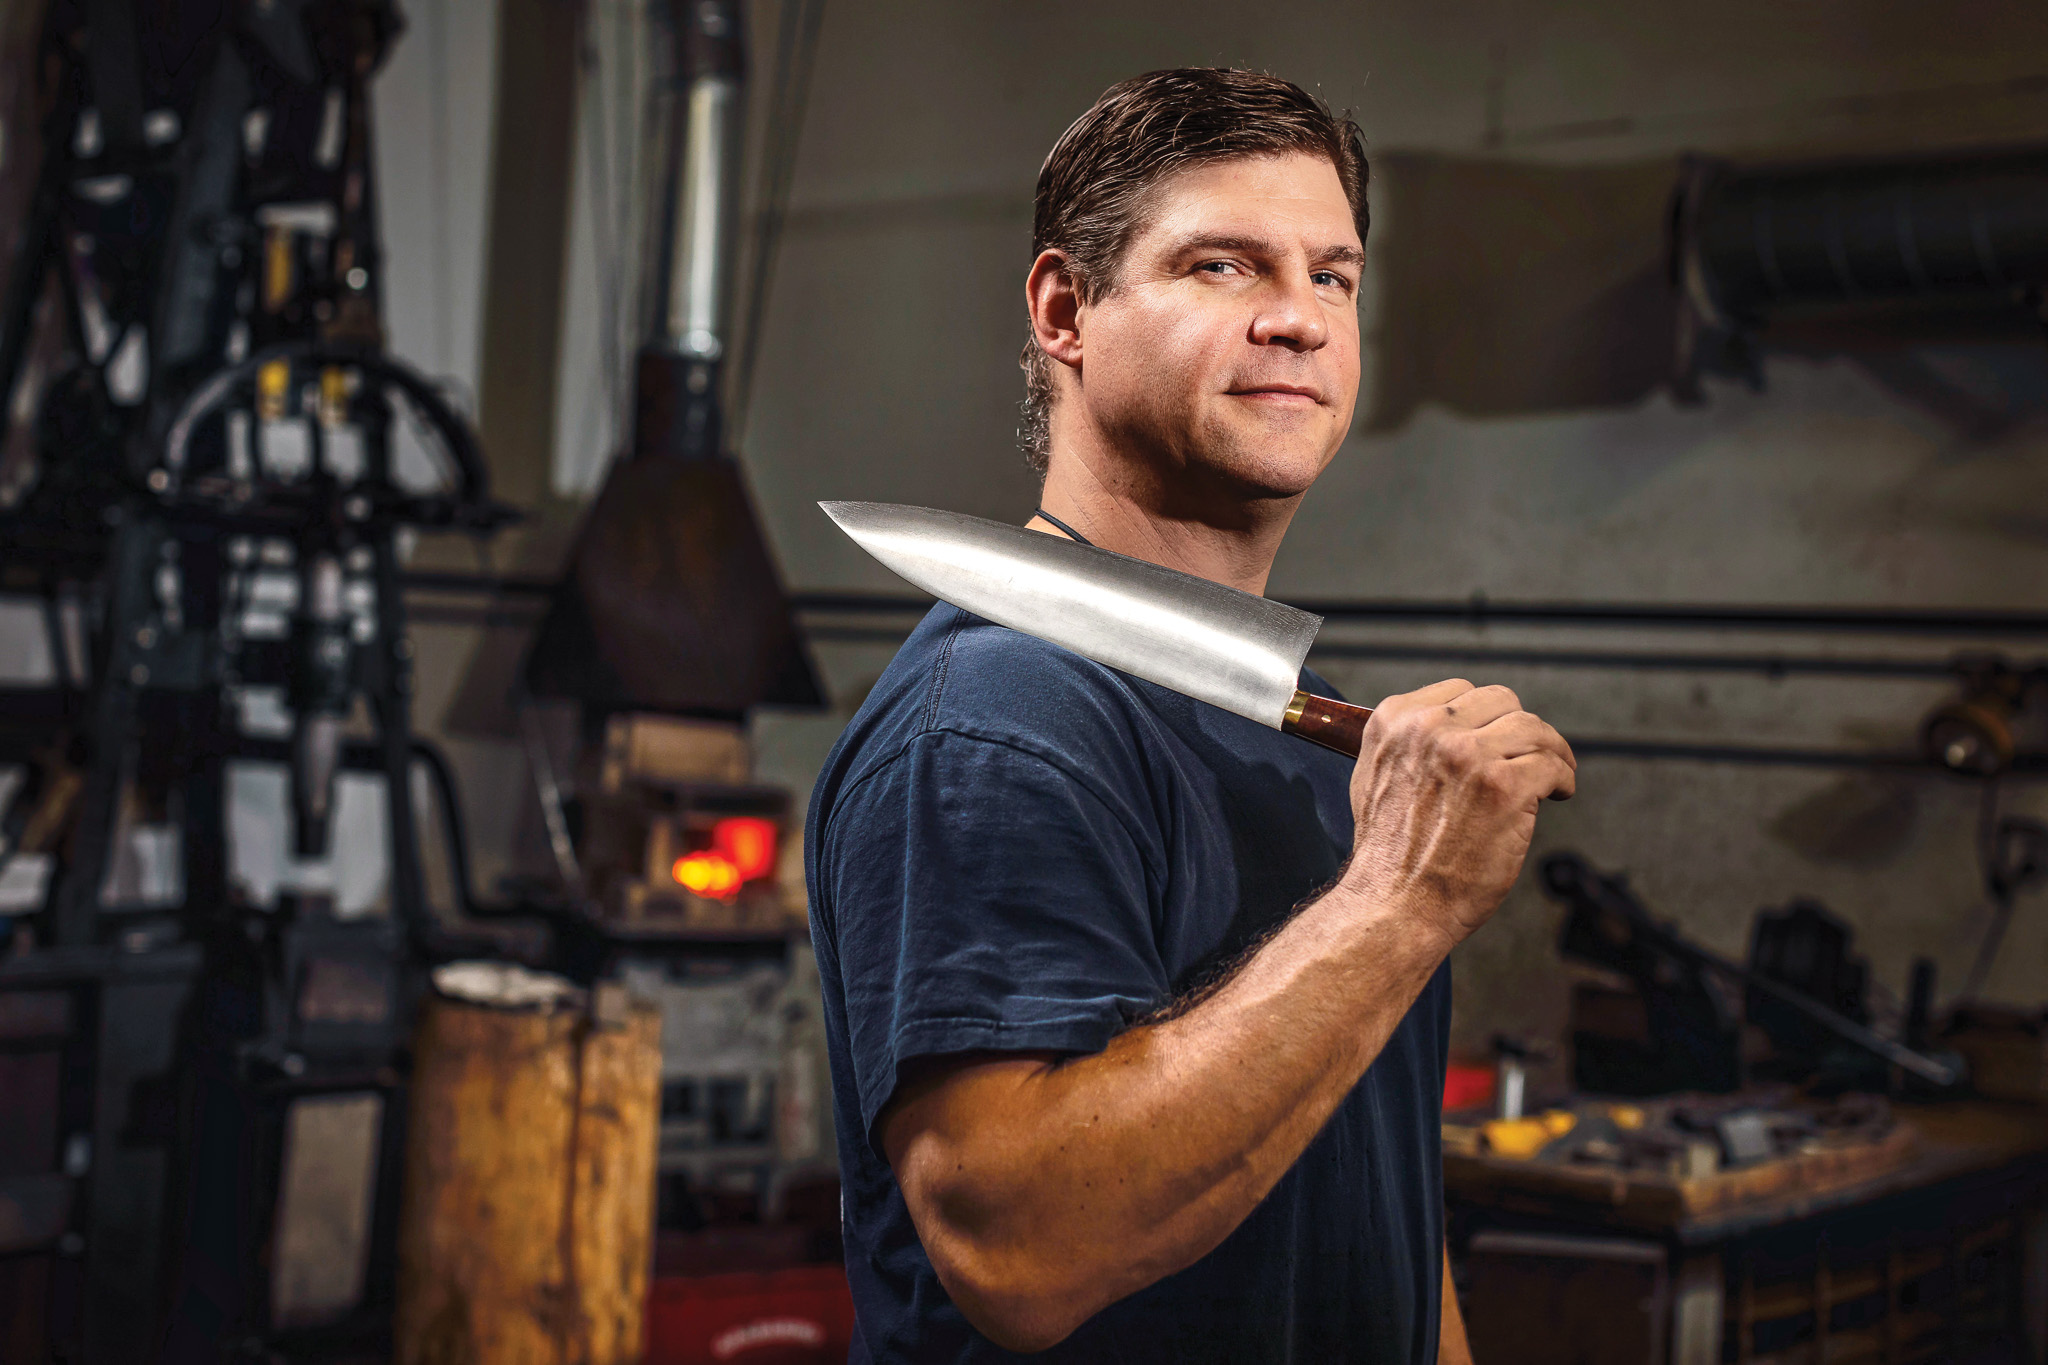 Knifemaker Murray Carter with a chef's knife.